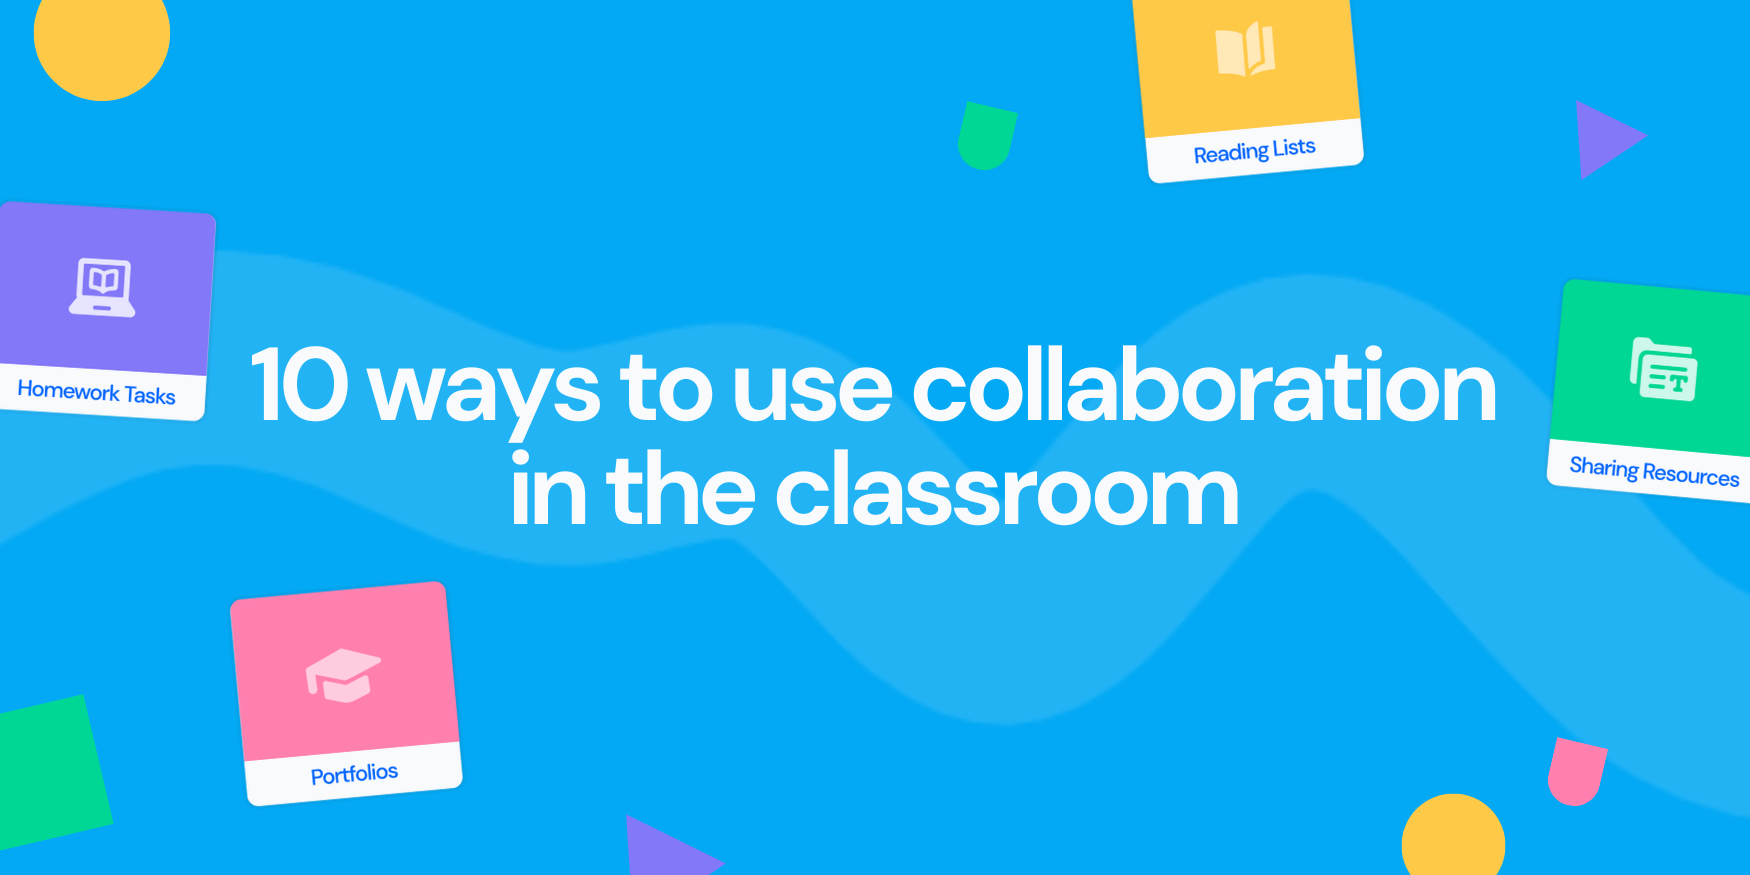 10 ways to use collaboration in the classroom